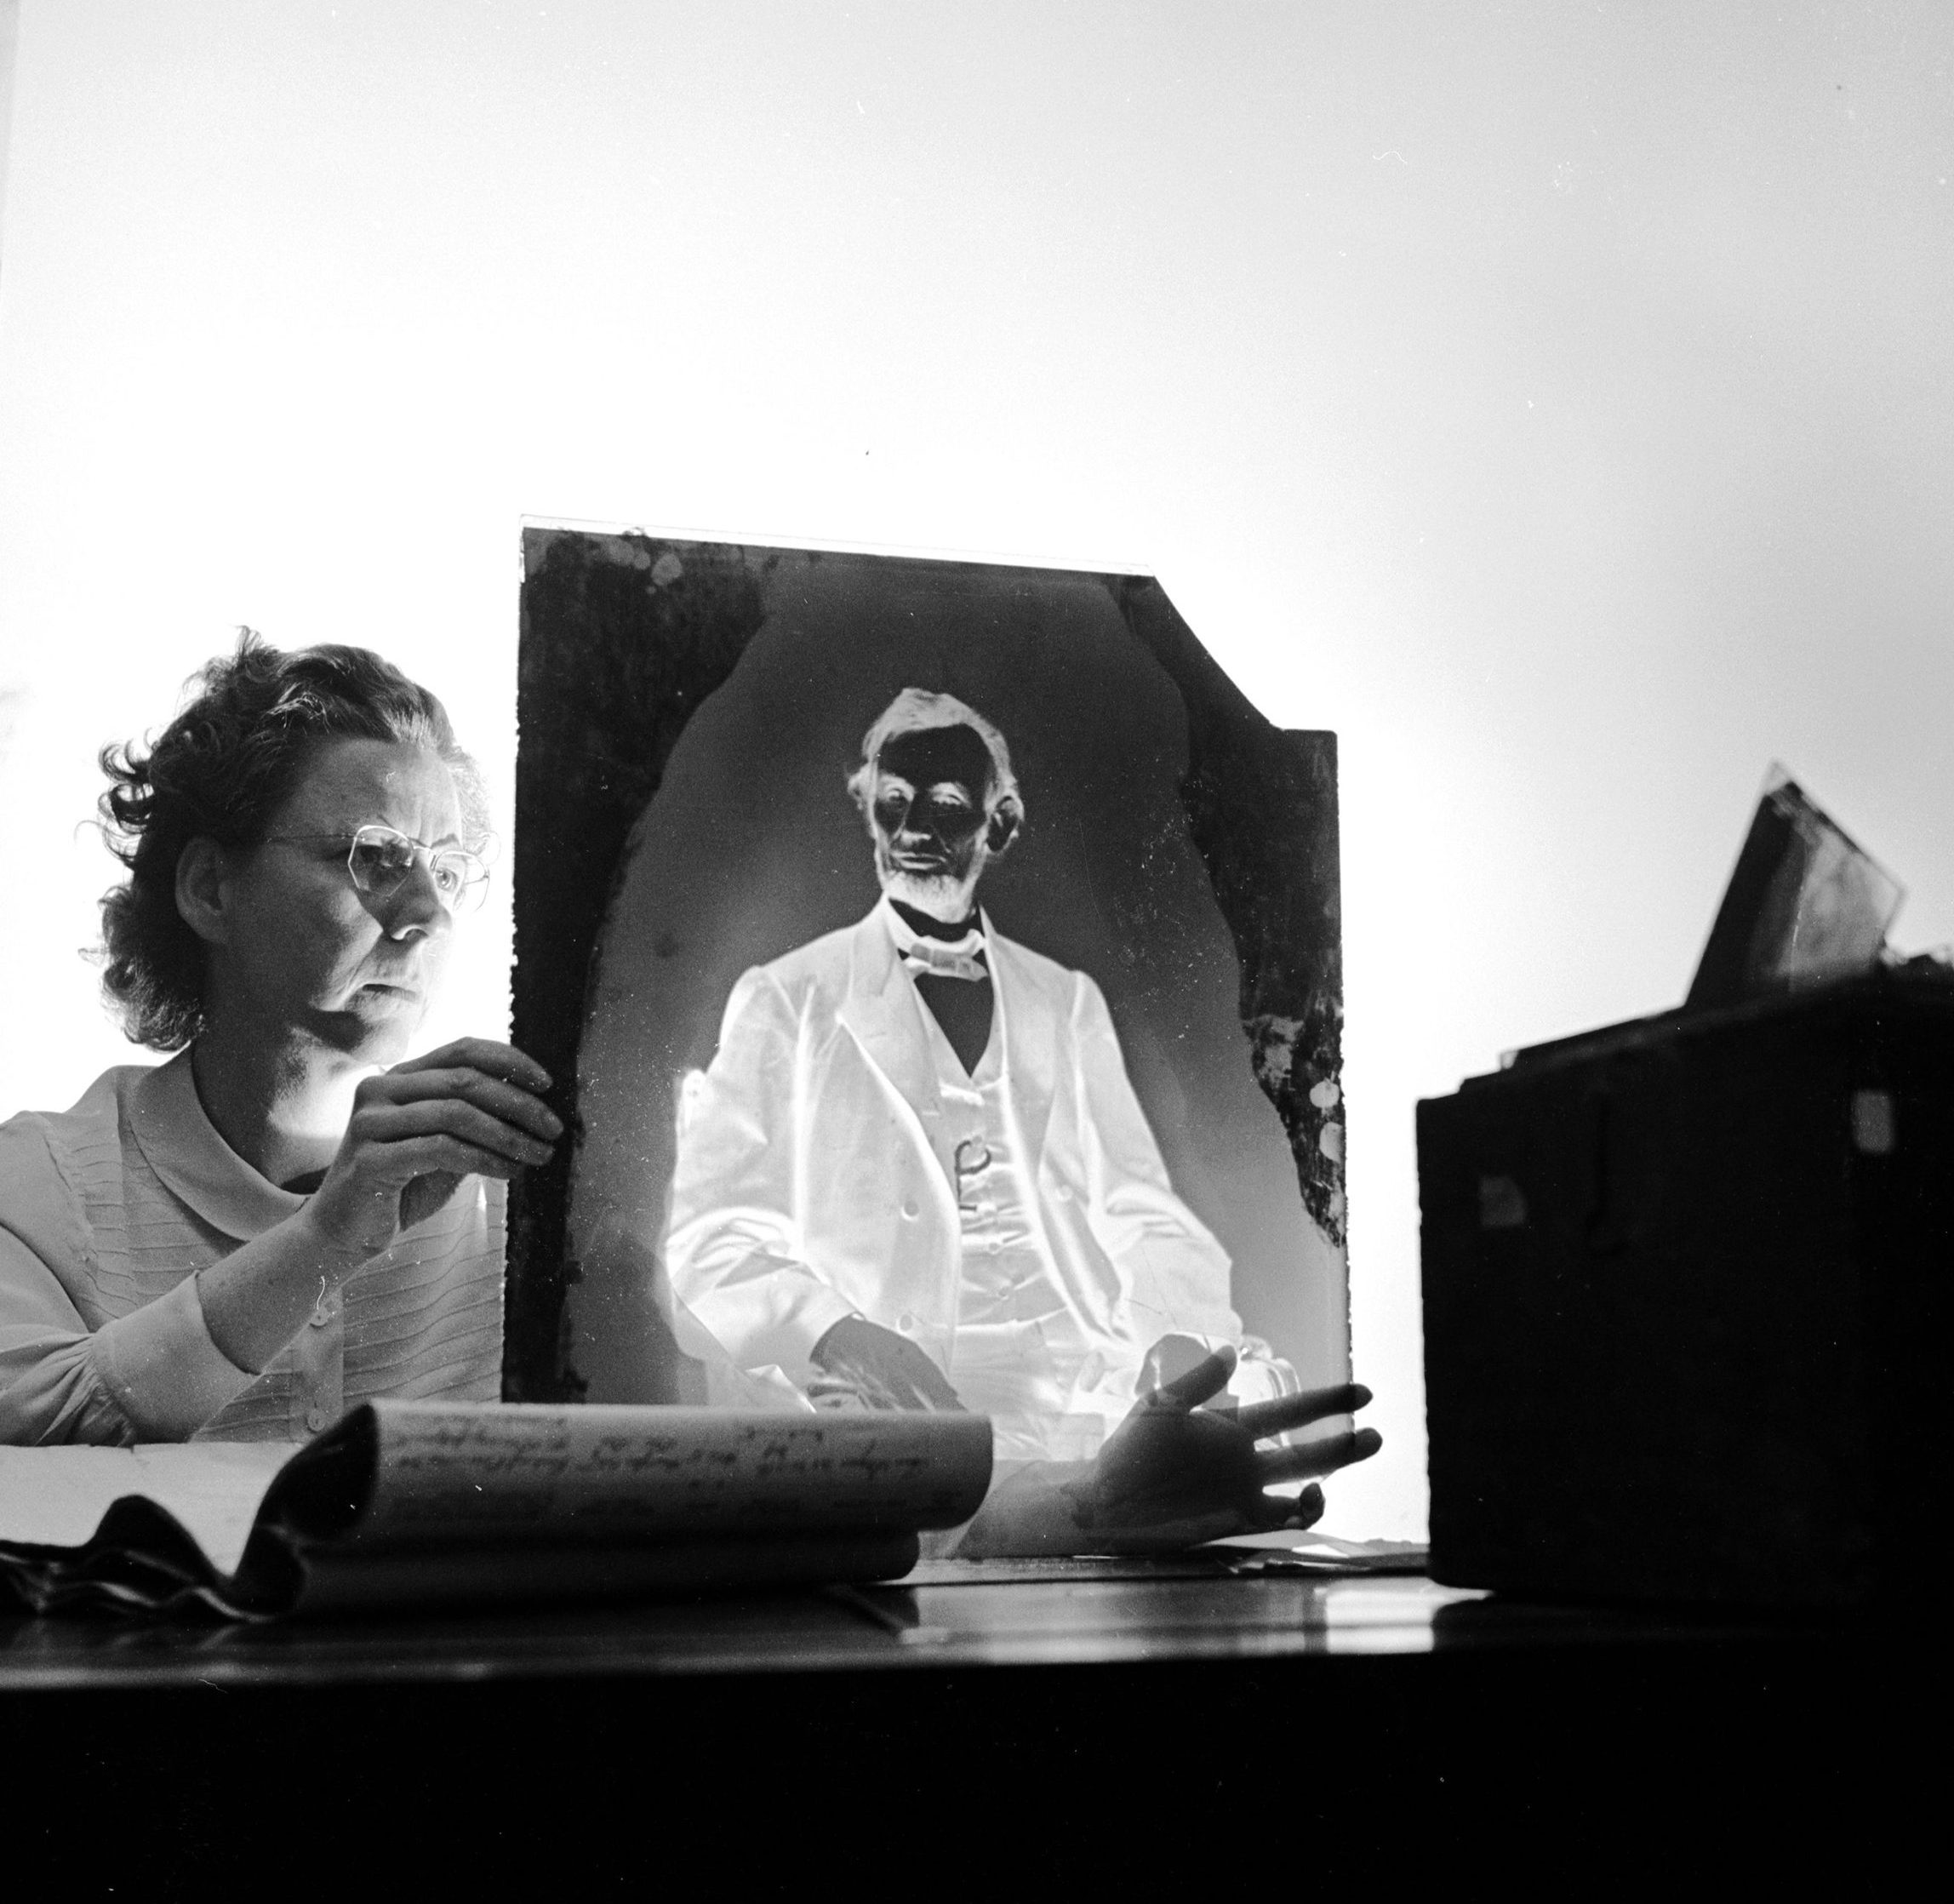 A researcher holding one of America's most priceless negatives, the glass plate made by famous civil war photographer Mathew Brady of Abraham Lincoln in 1865 just before the 16th President of the United States was assassinated. It is stored in the National Archives in Washington.